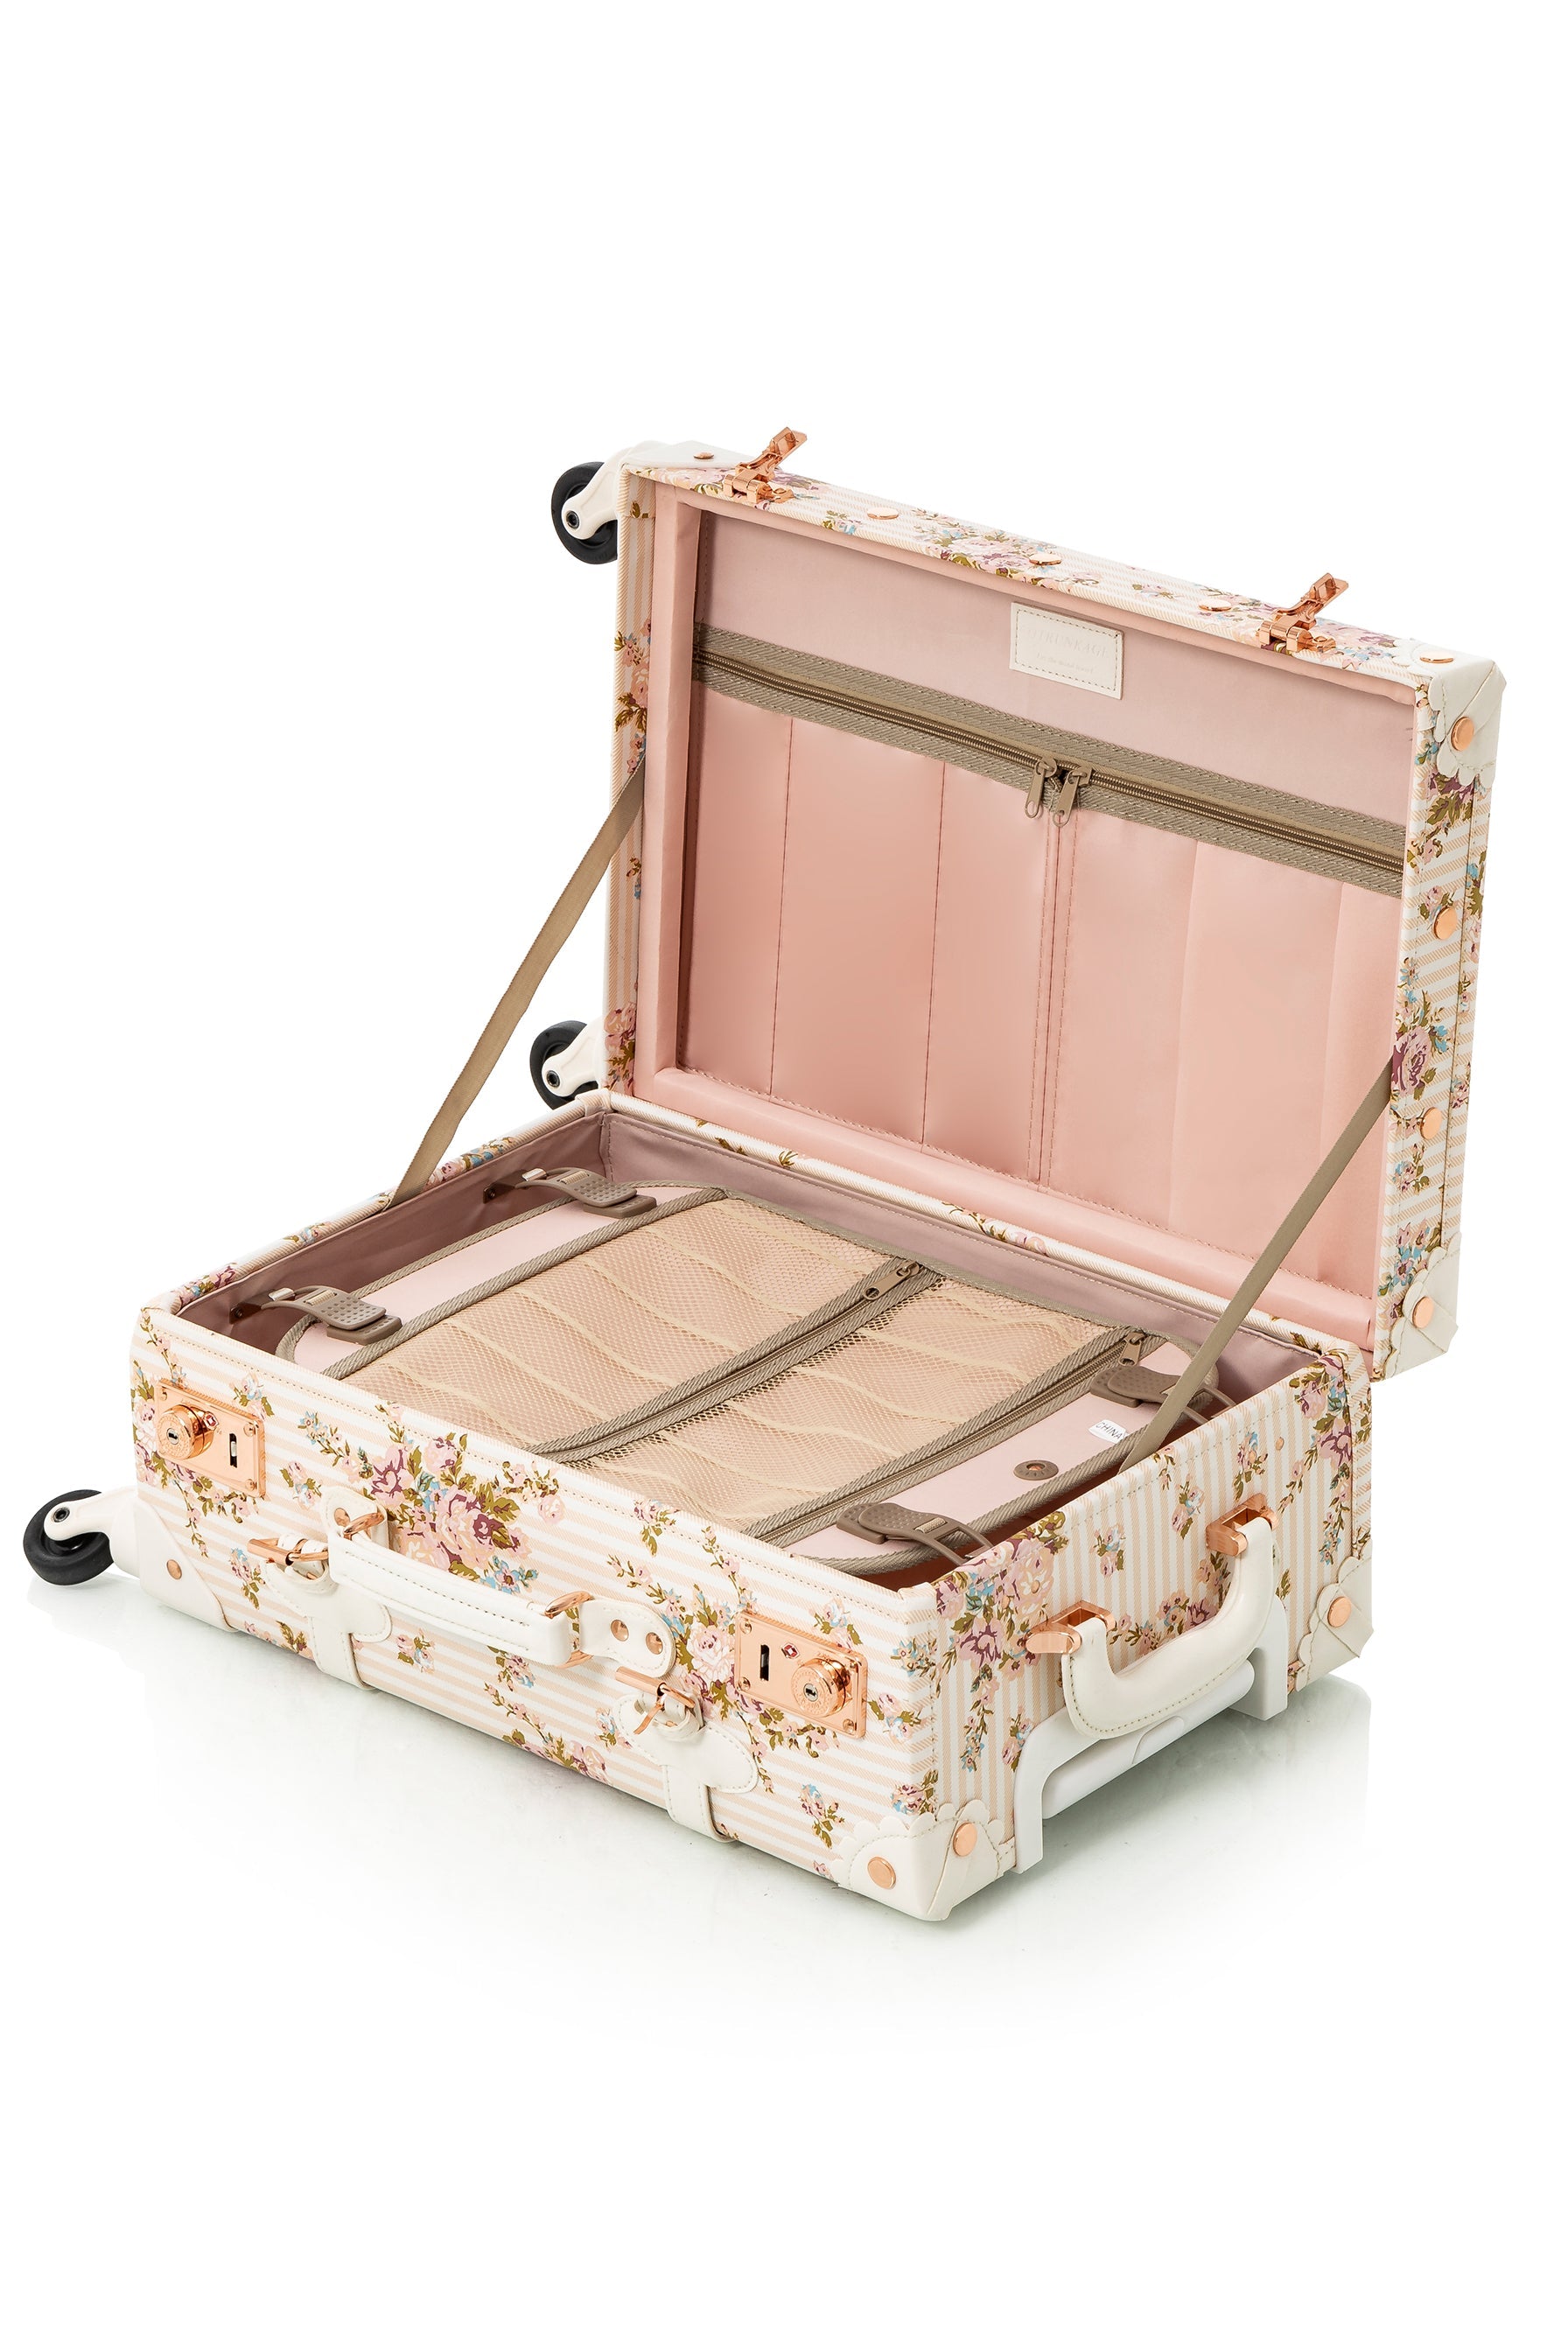 (United States) WildFloral 3 Pieces Luggage Set - Beige Floral's